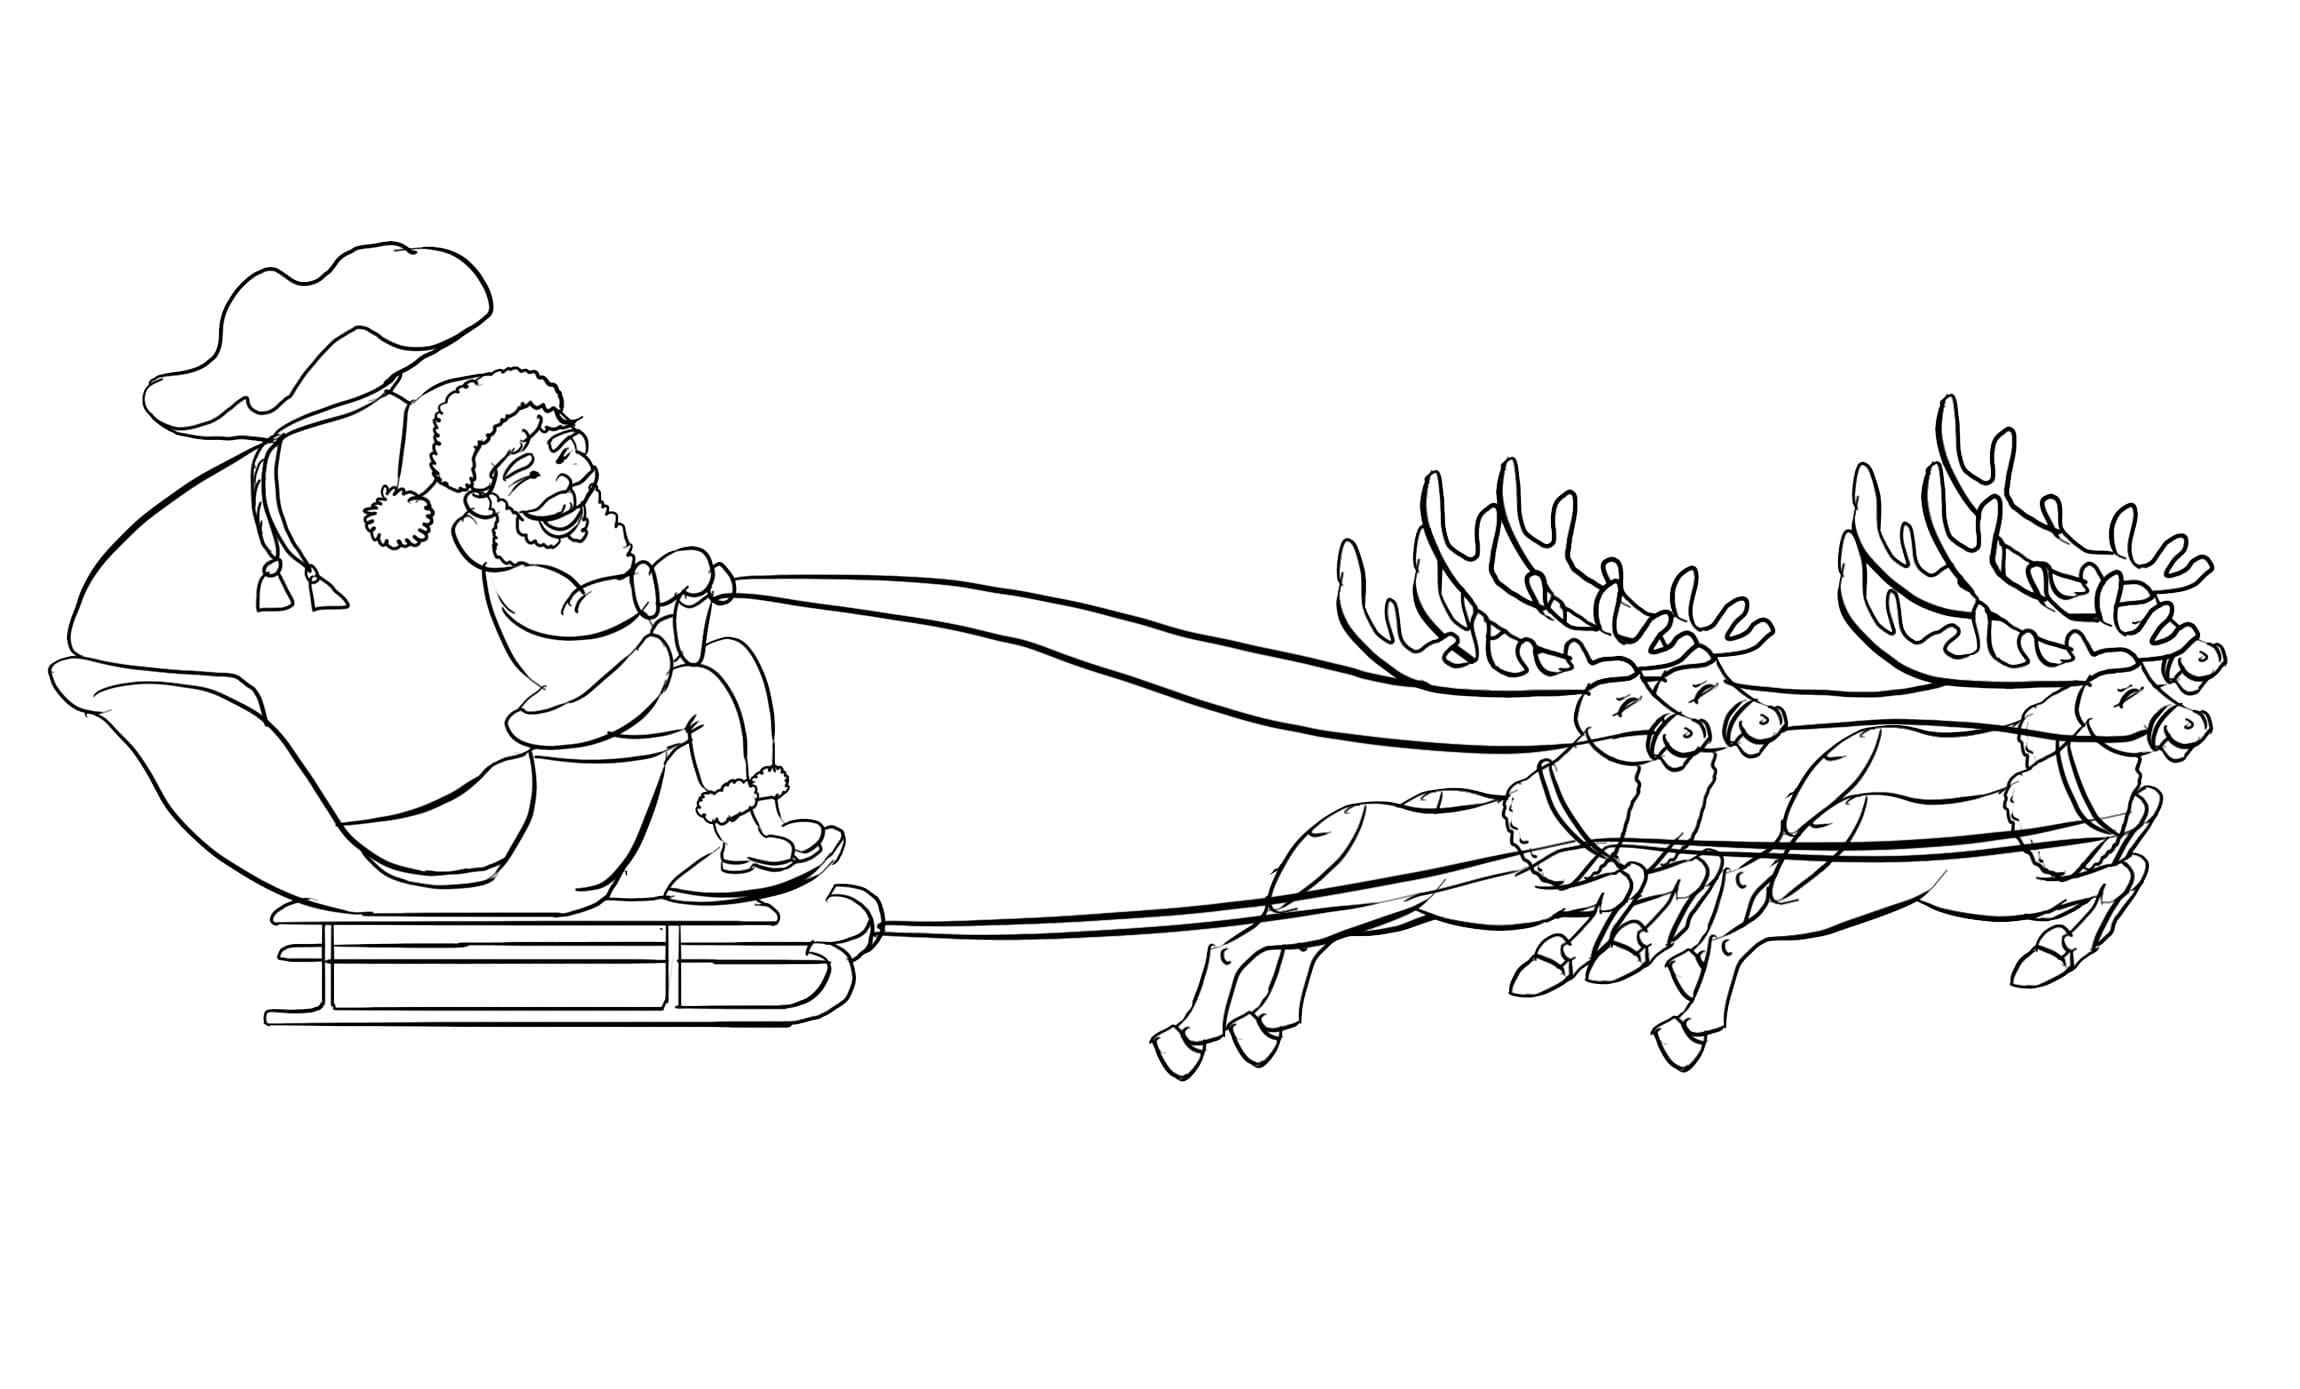 Fabulous Reindeer Are Carrying Santa Coloring Page